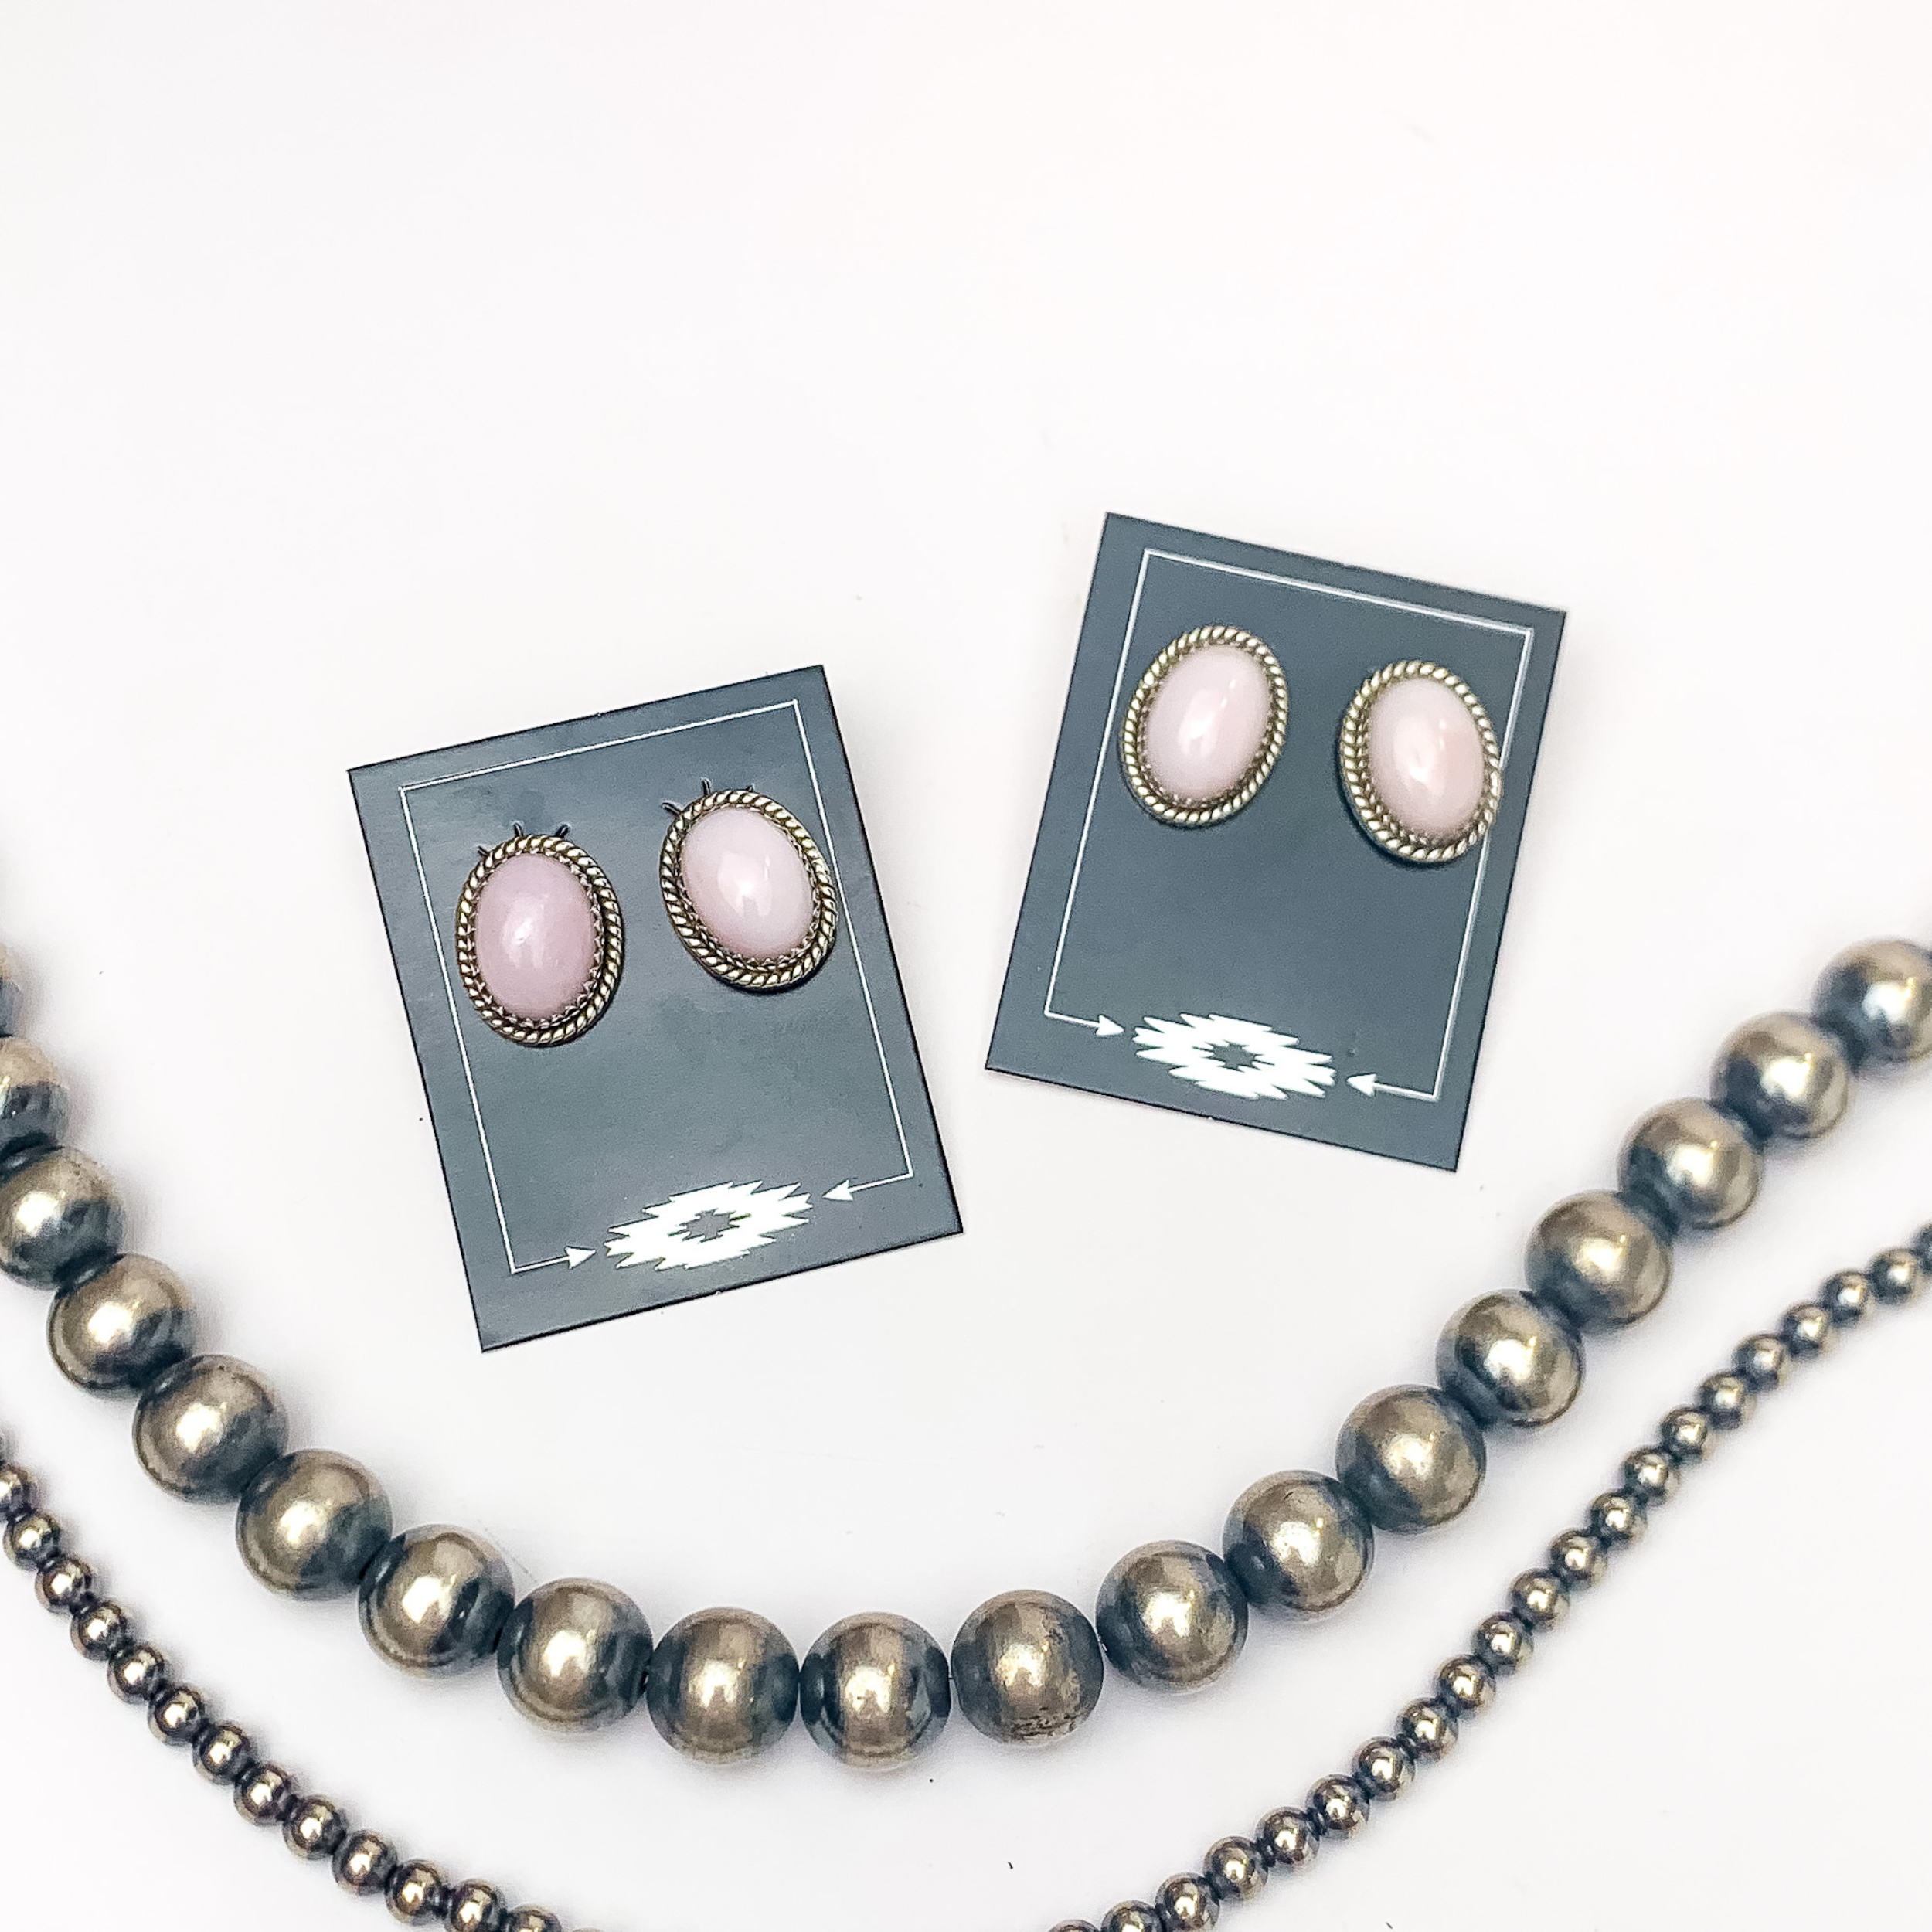 In the picture are handmade sterling silver oval shaped stud earrings with a pink opal color with a white background 